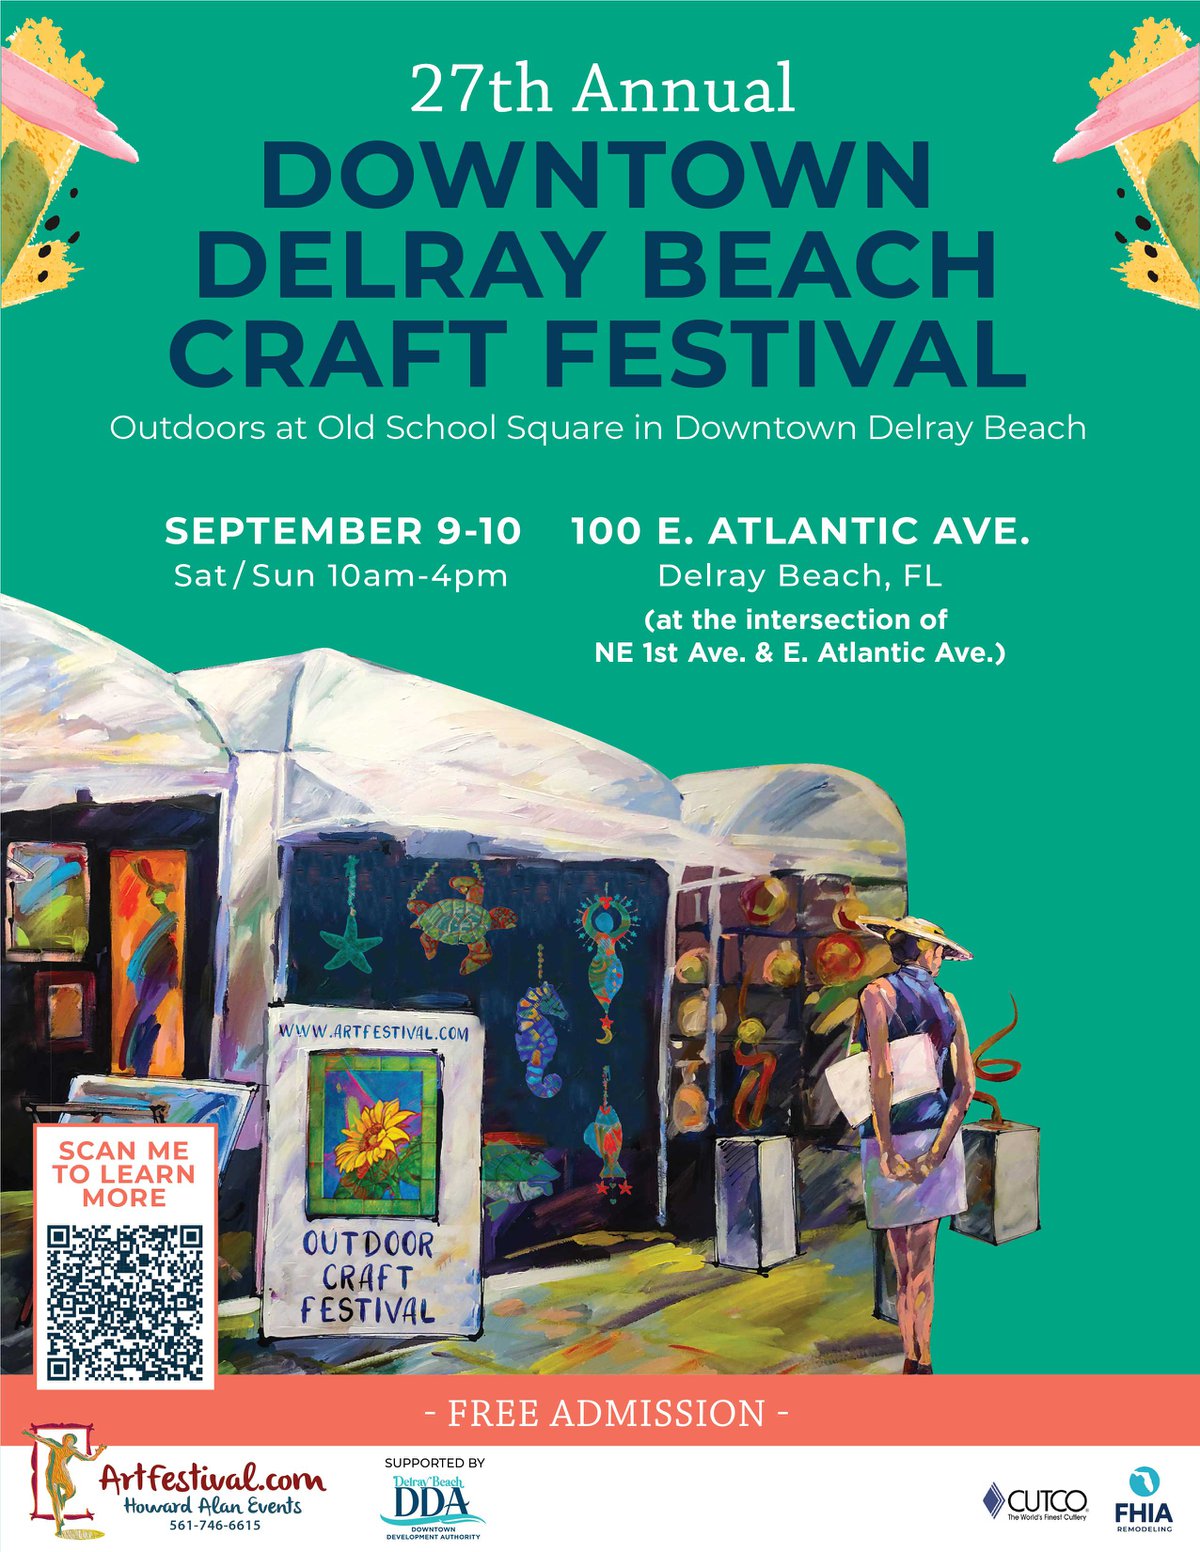 27th Annual Downtown Delray Beach Craft Festival at Old School Square